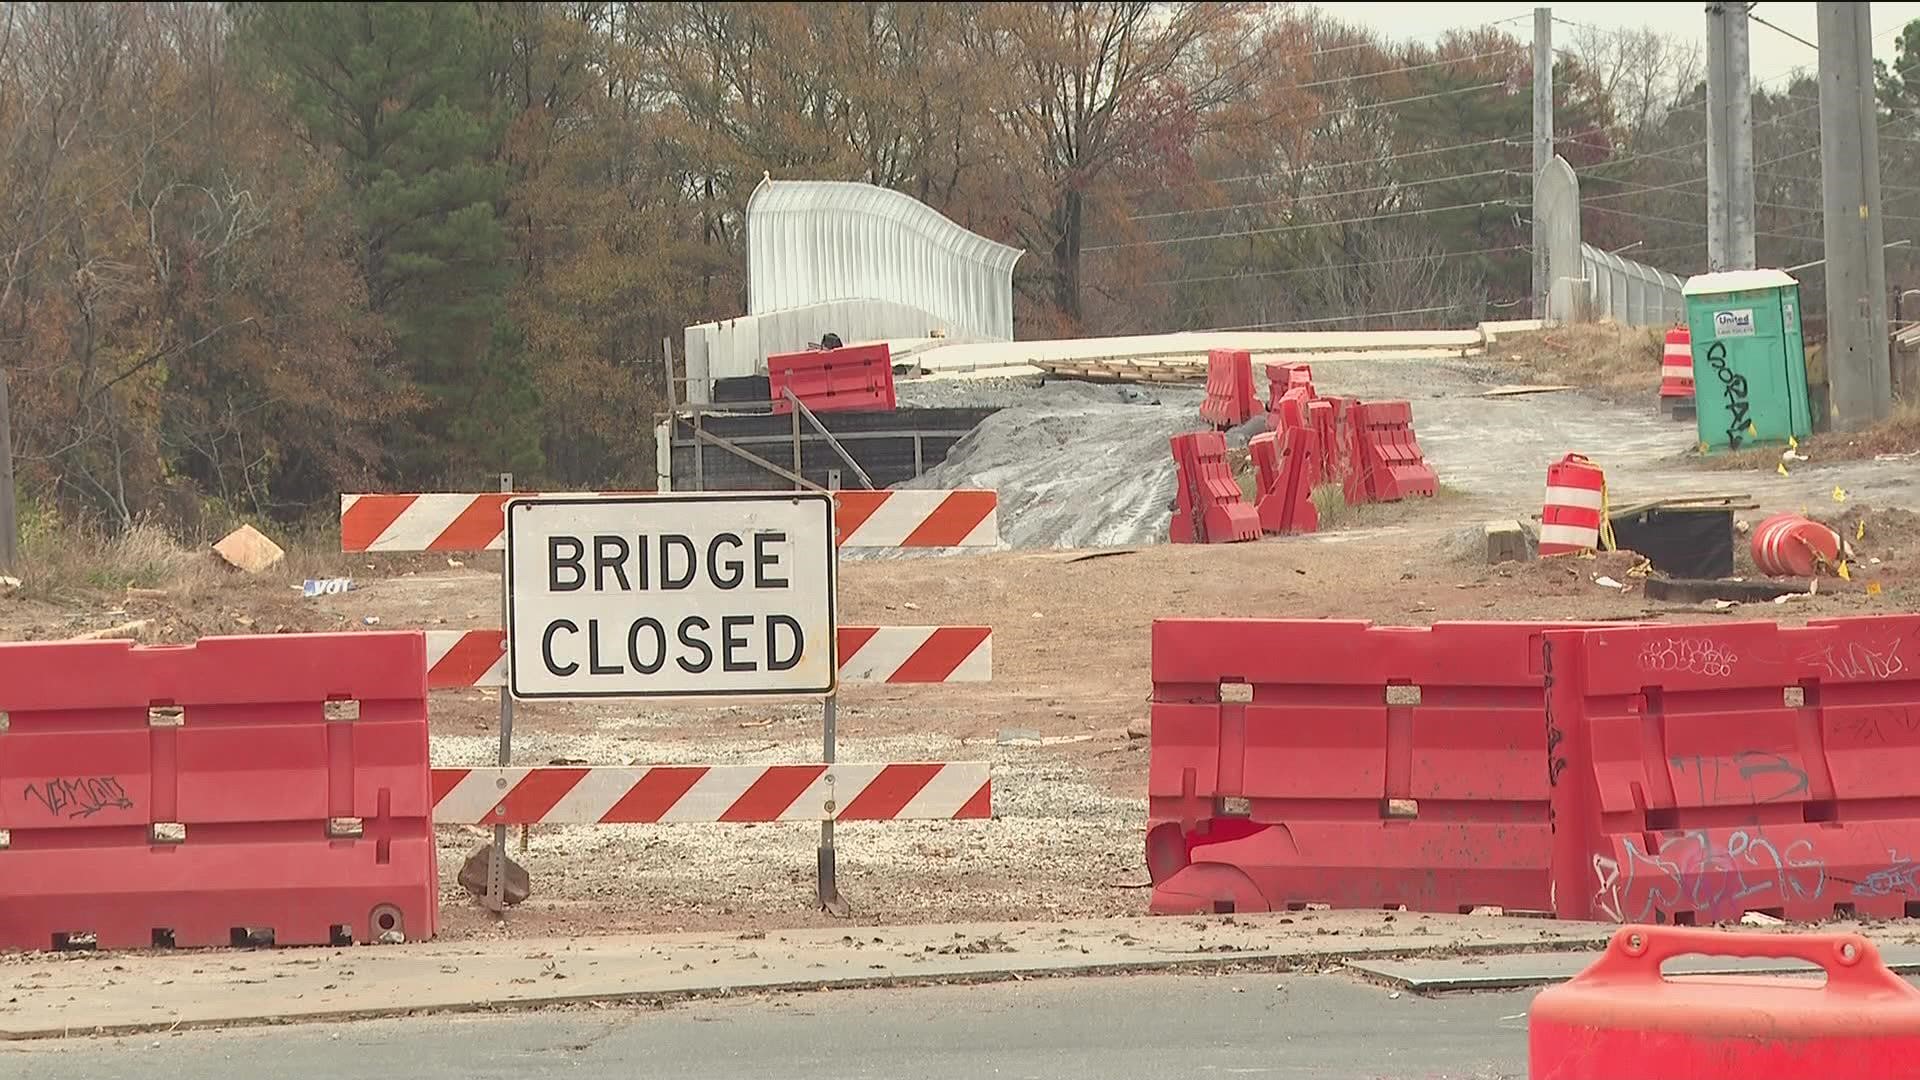 11Alive is following up on a traffic project that's taken years to be built. The McDonough Boulevard Bridge links key parts of southeast Atlanta.